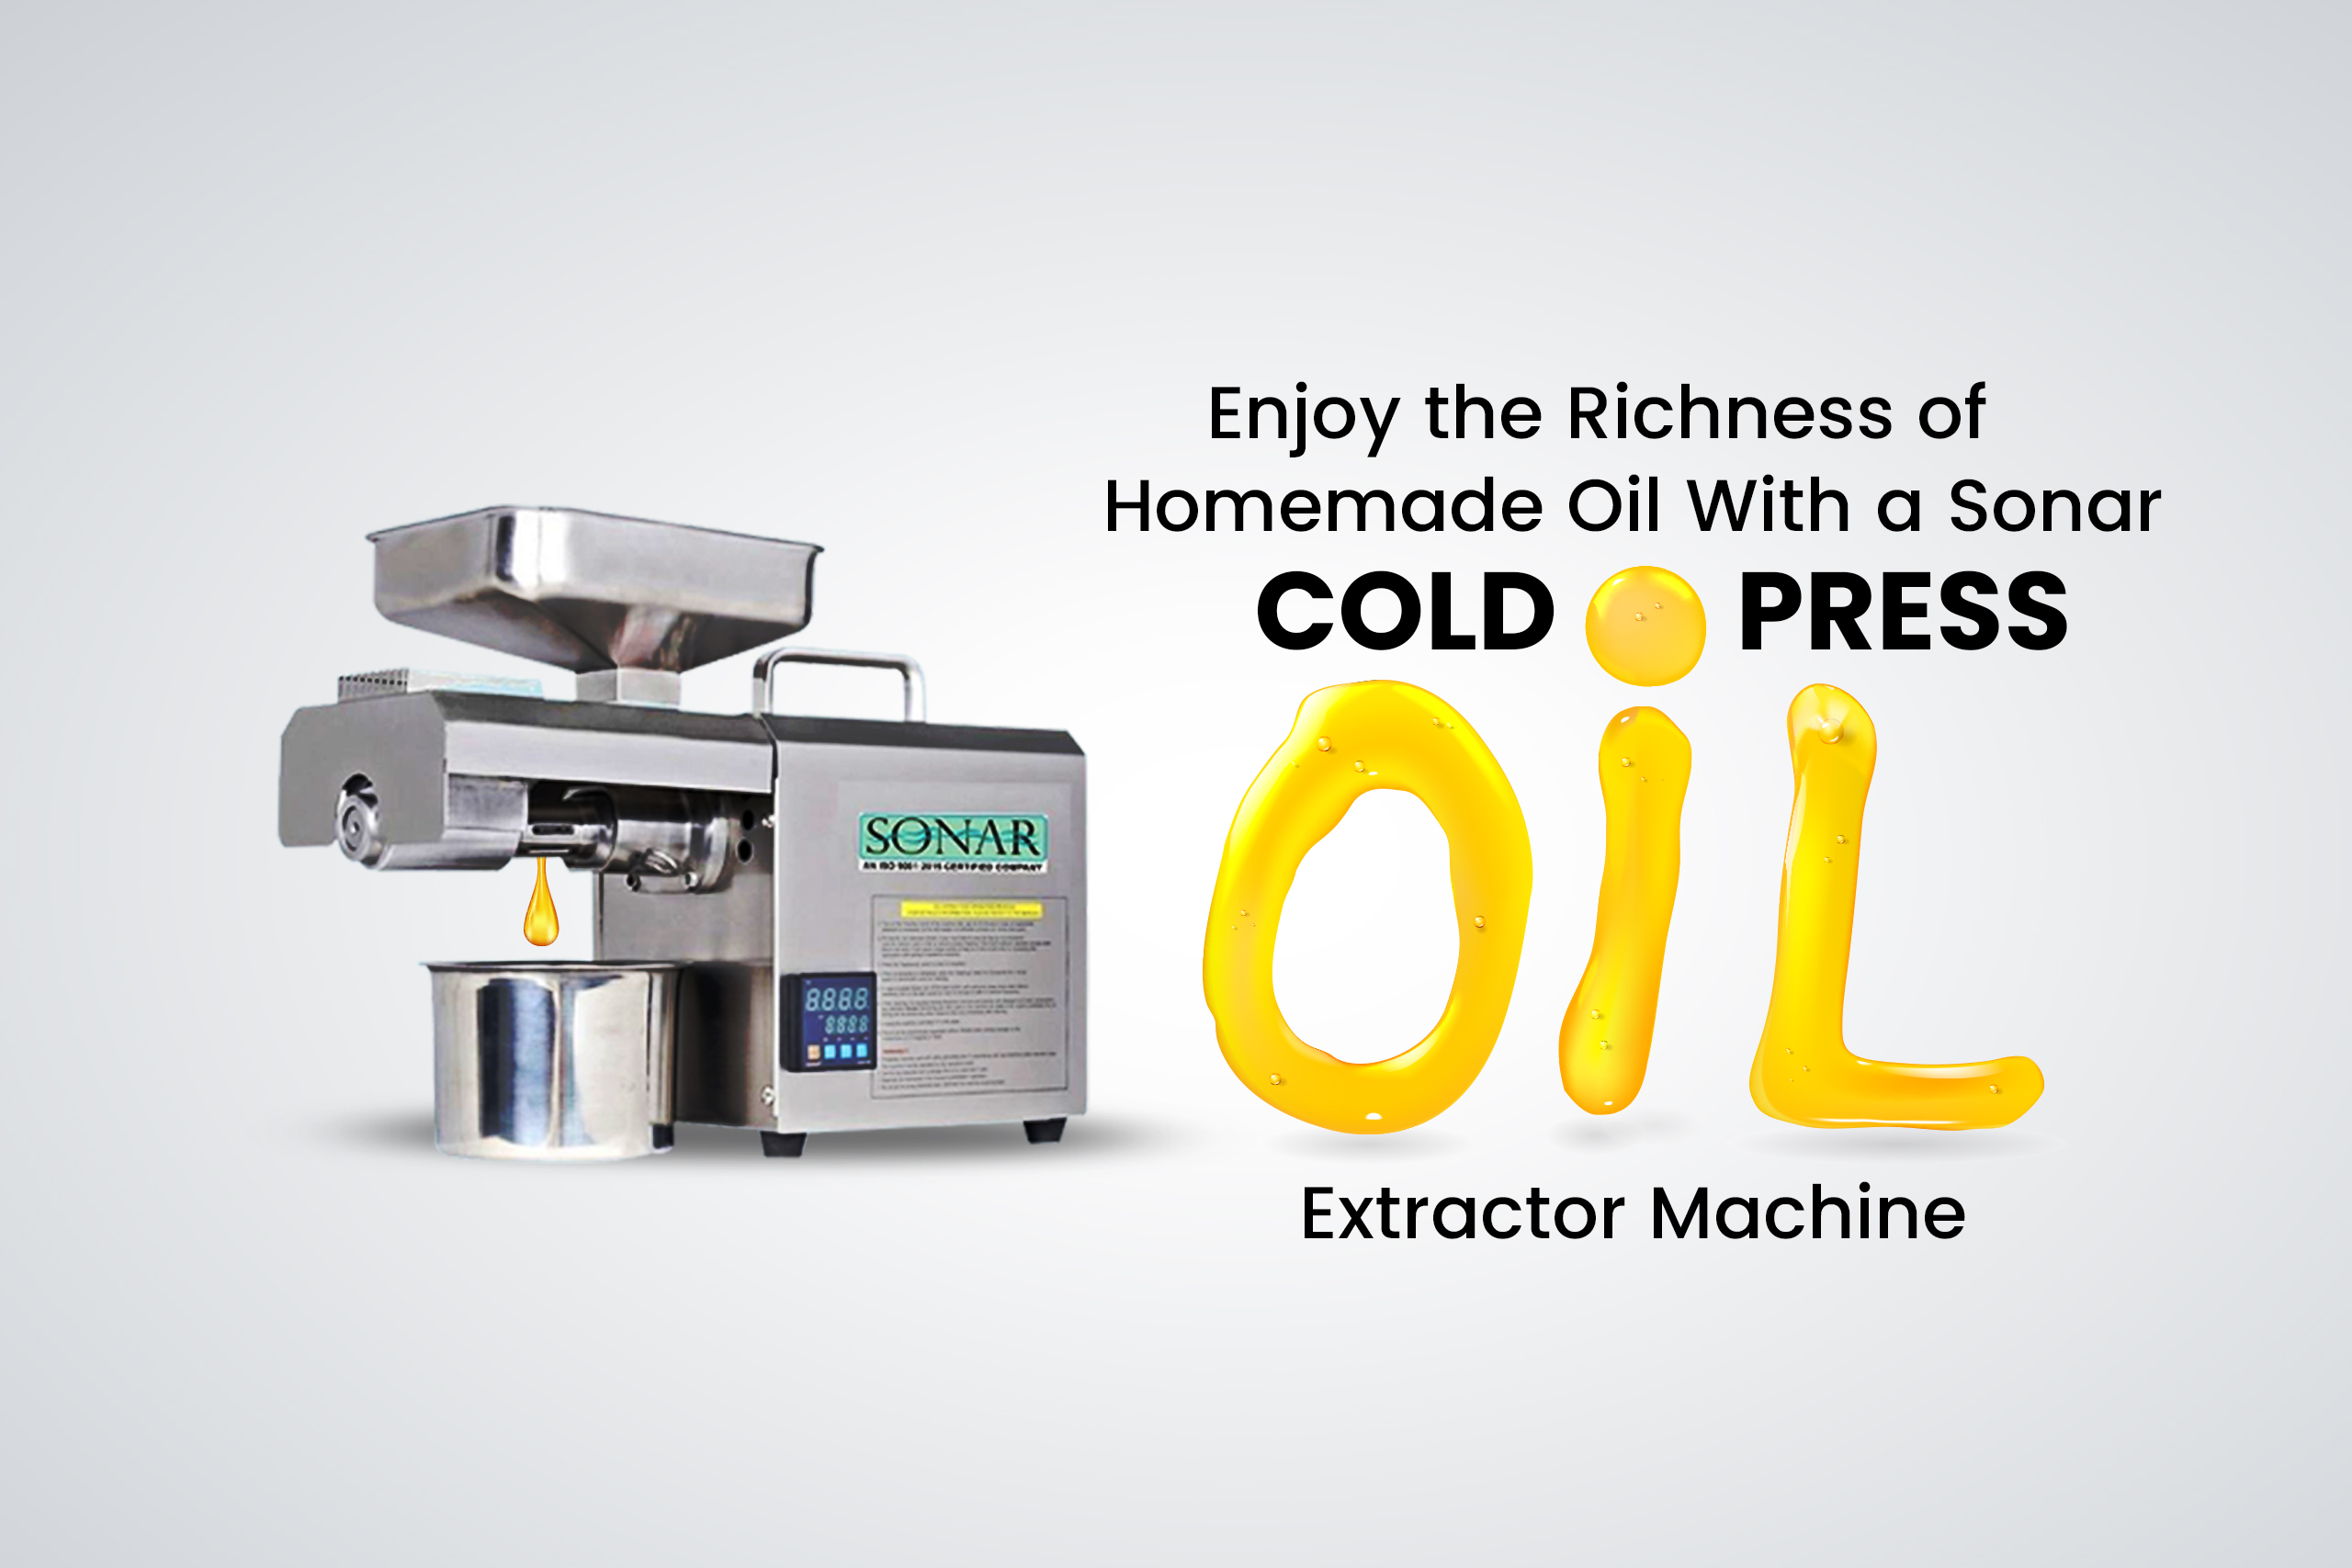 Enjoy the Richness of Homemade Oil with a Sonar Cold Press Oil Extractor Machine